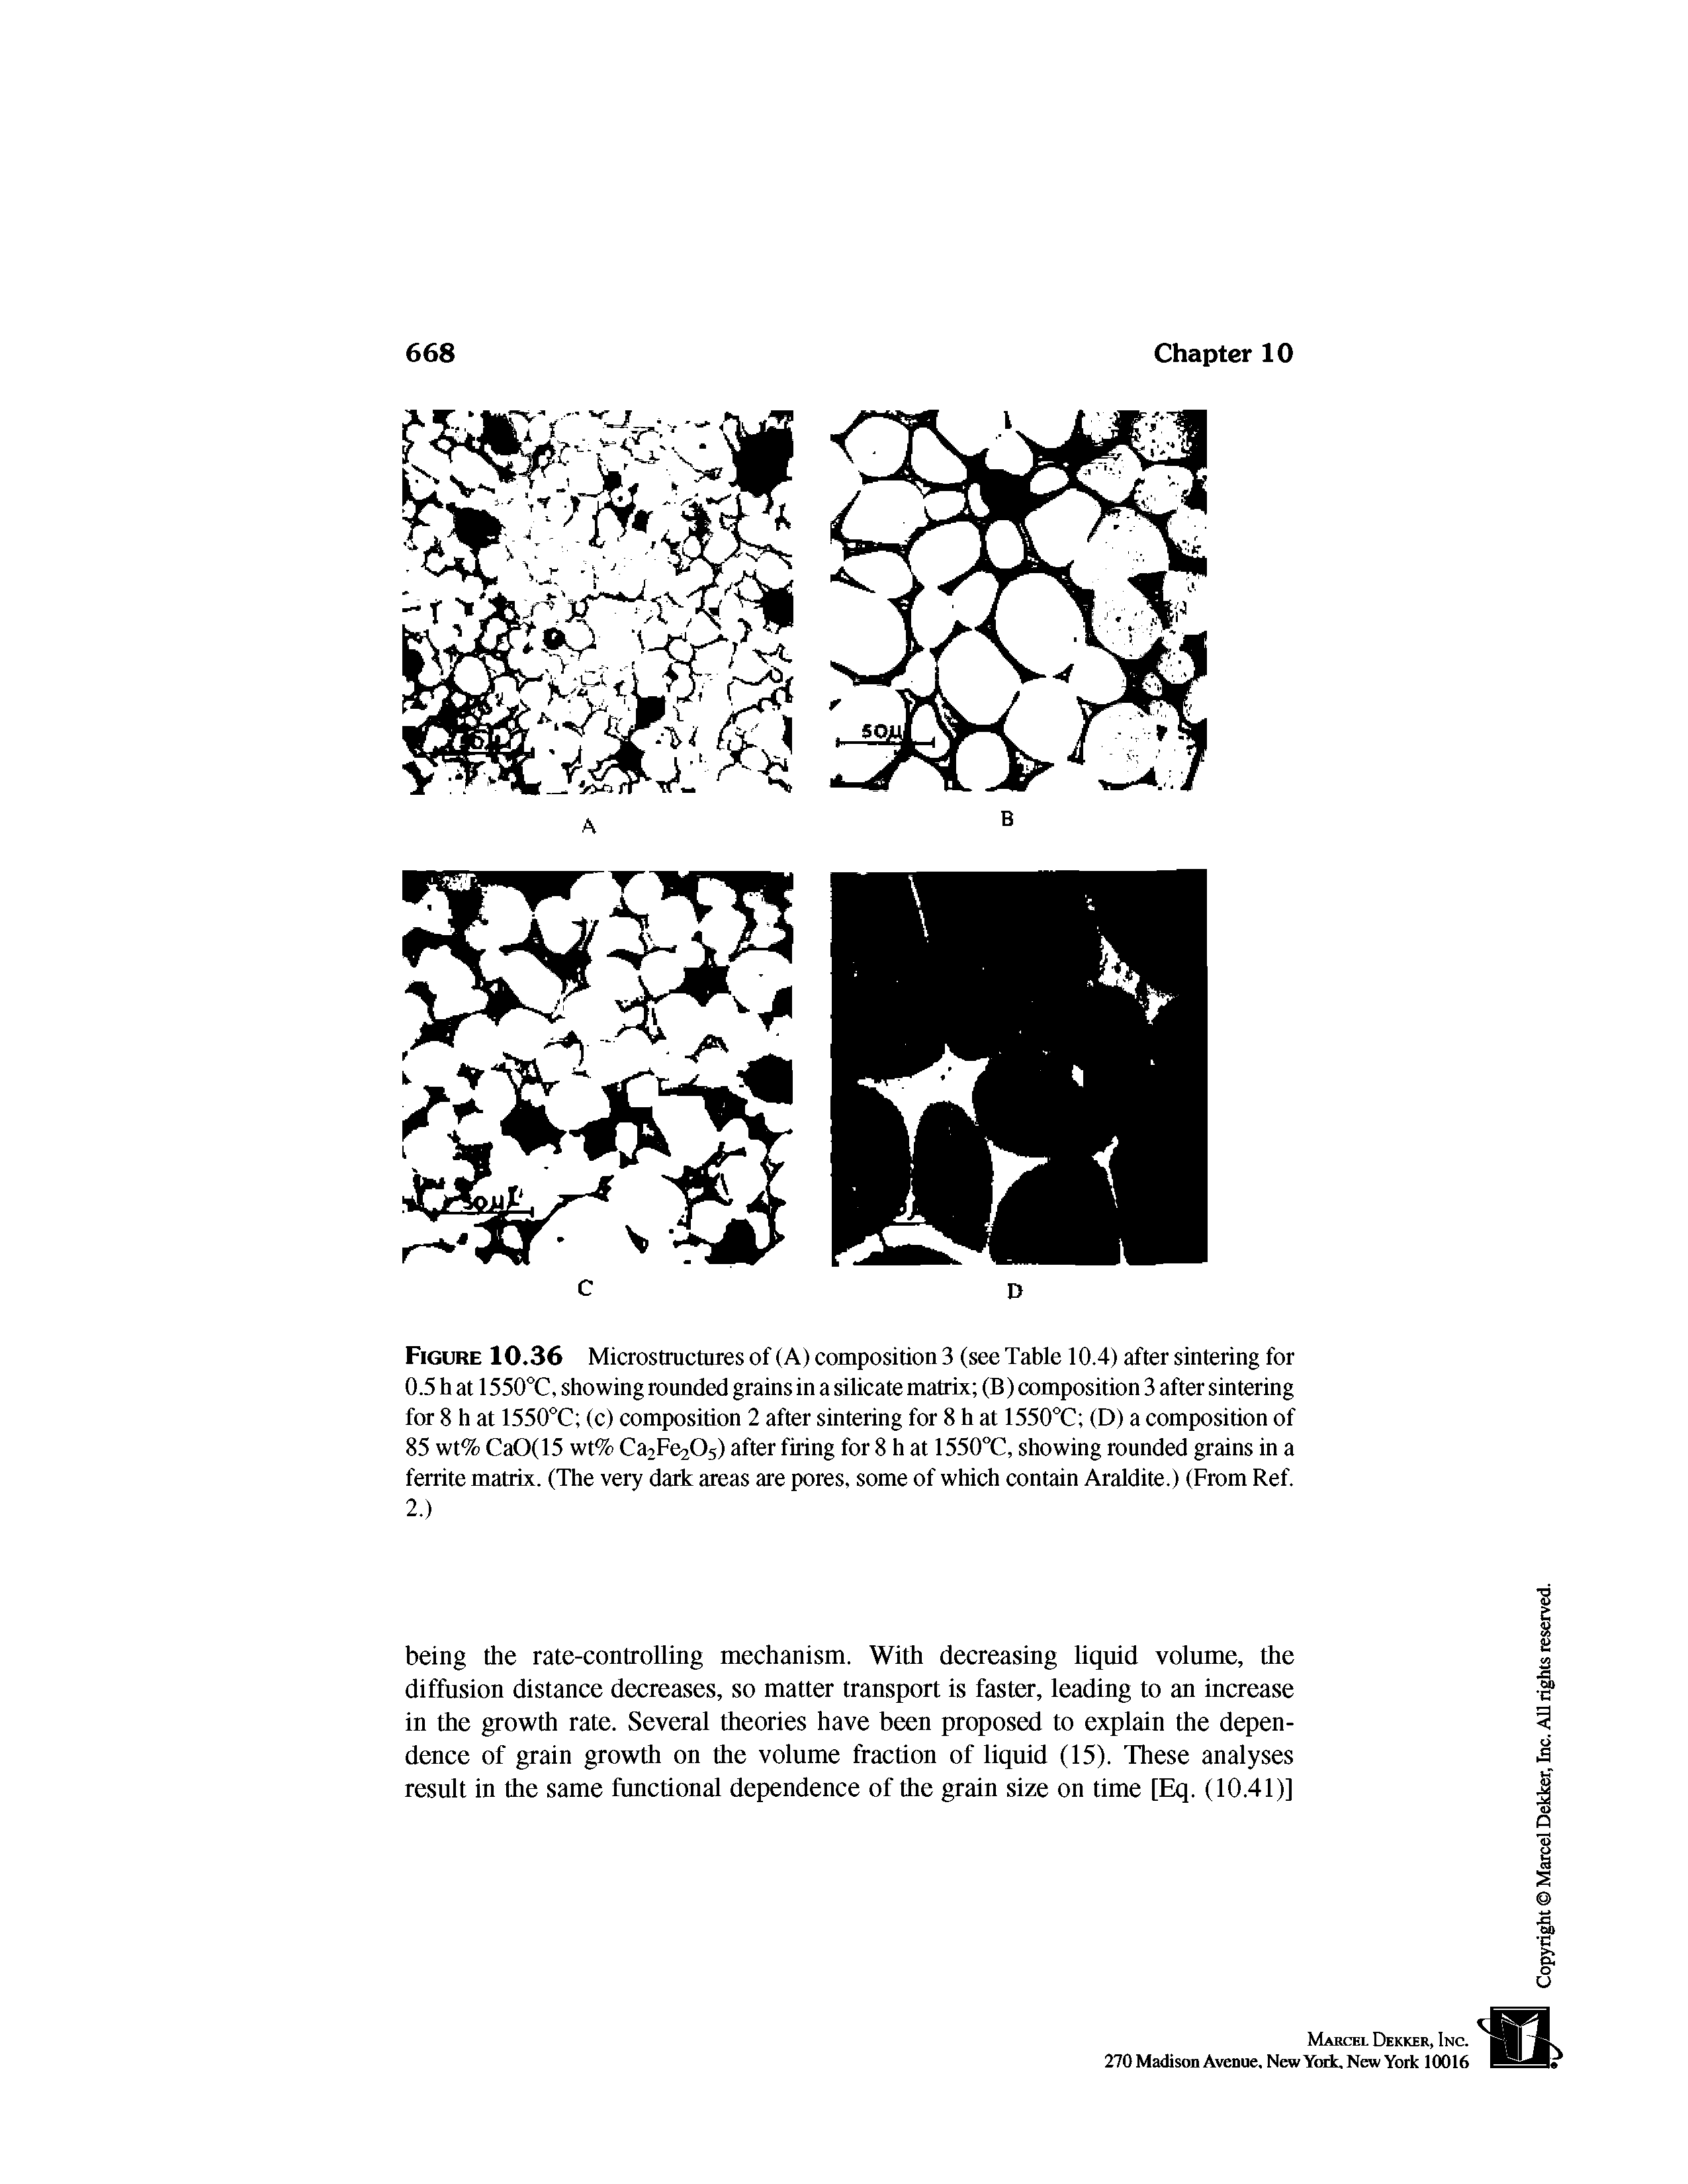 Figure 10.36 Microstructures of (A) composition 3 (see Table 10.4) after sintering for 0.5 h at 1550"C, showing rounded grains in a silicate matrix (B) composition 3 after sintering for 8 h at 1550 C (c) composition 2 after sintering for 8 h at 1550T (D) a composition of 85 wt% CaO(15 wt% Ca2Fe205> after firing for 8 h at 1550°C, showing rounded grains in a ferrite matrix. (The very dark areas are pores, some of which contain Araldite.) (From Ref. 2.)...